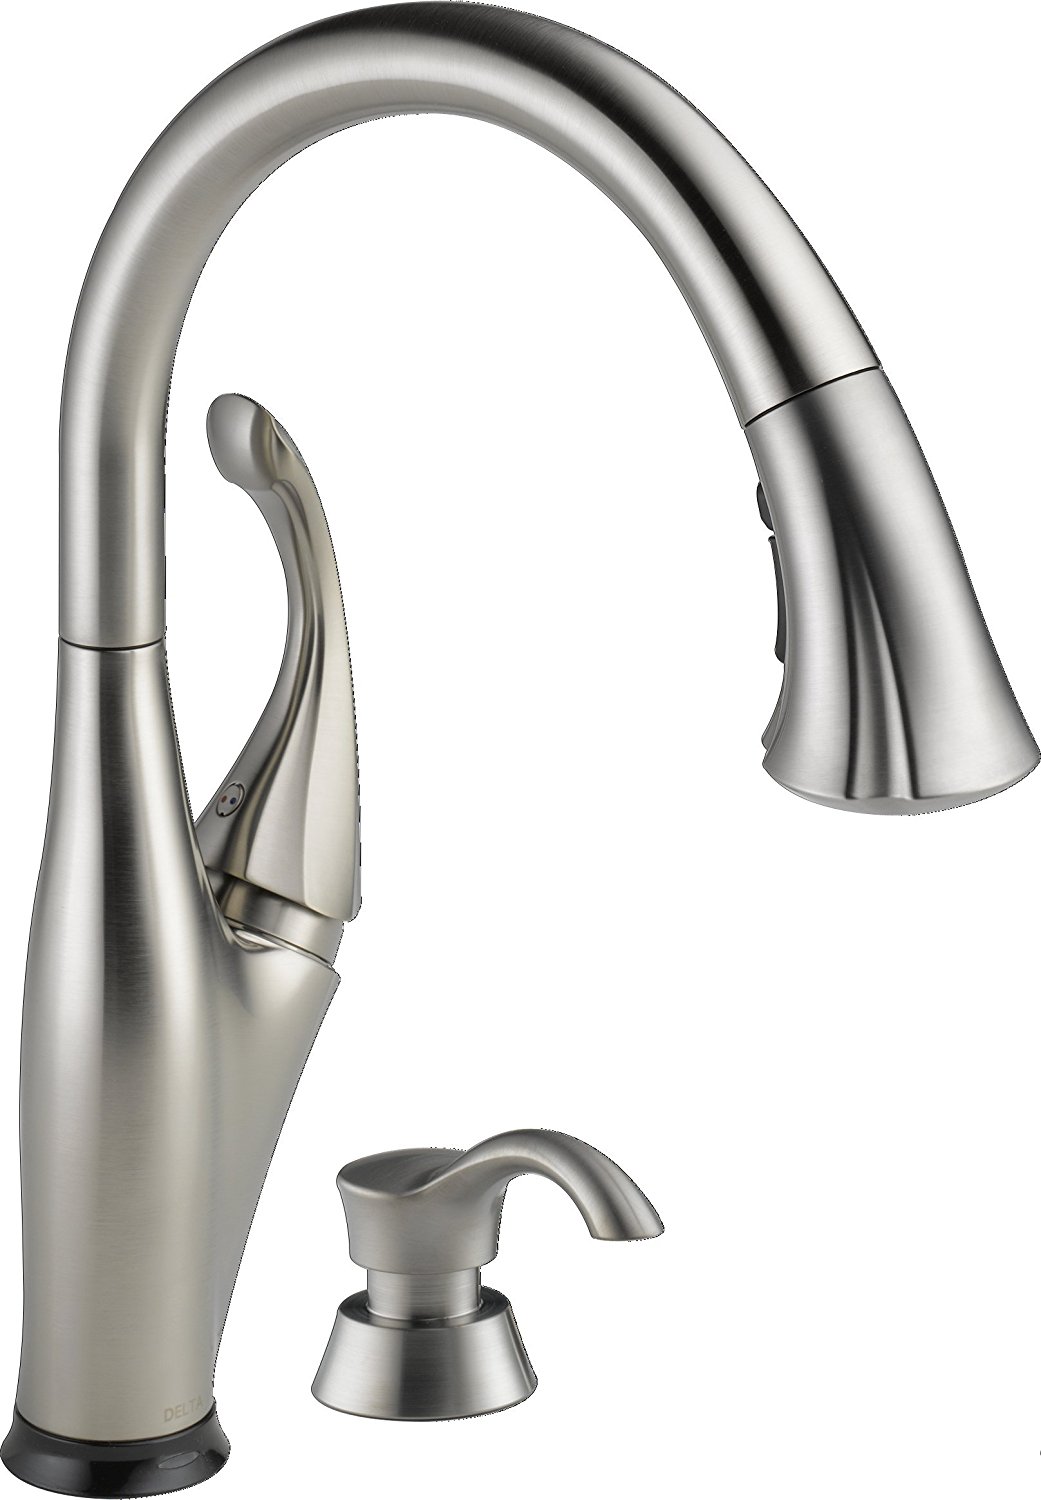 Delta Faucet 9192T-SSSD-DST Addison Single Handle Pull-Down Kitchen Faucet with Touch2O Technology and Soap Dispenser, Stainless